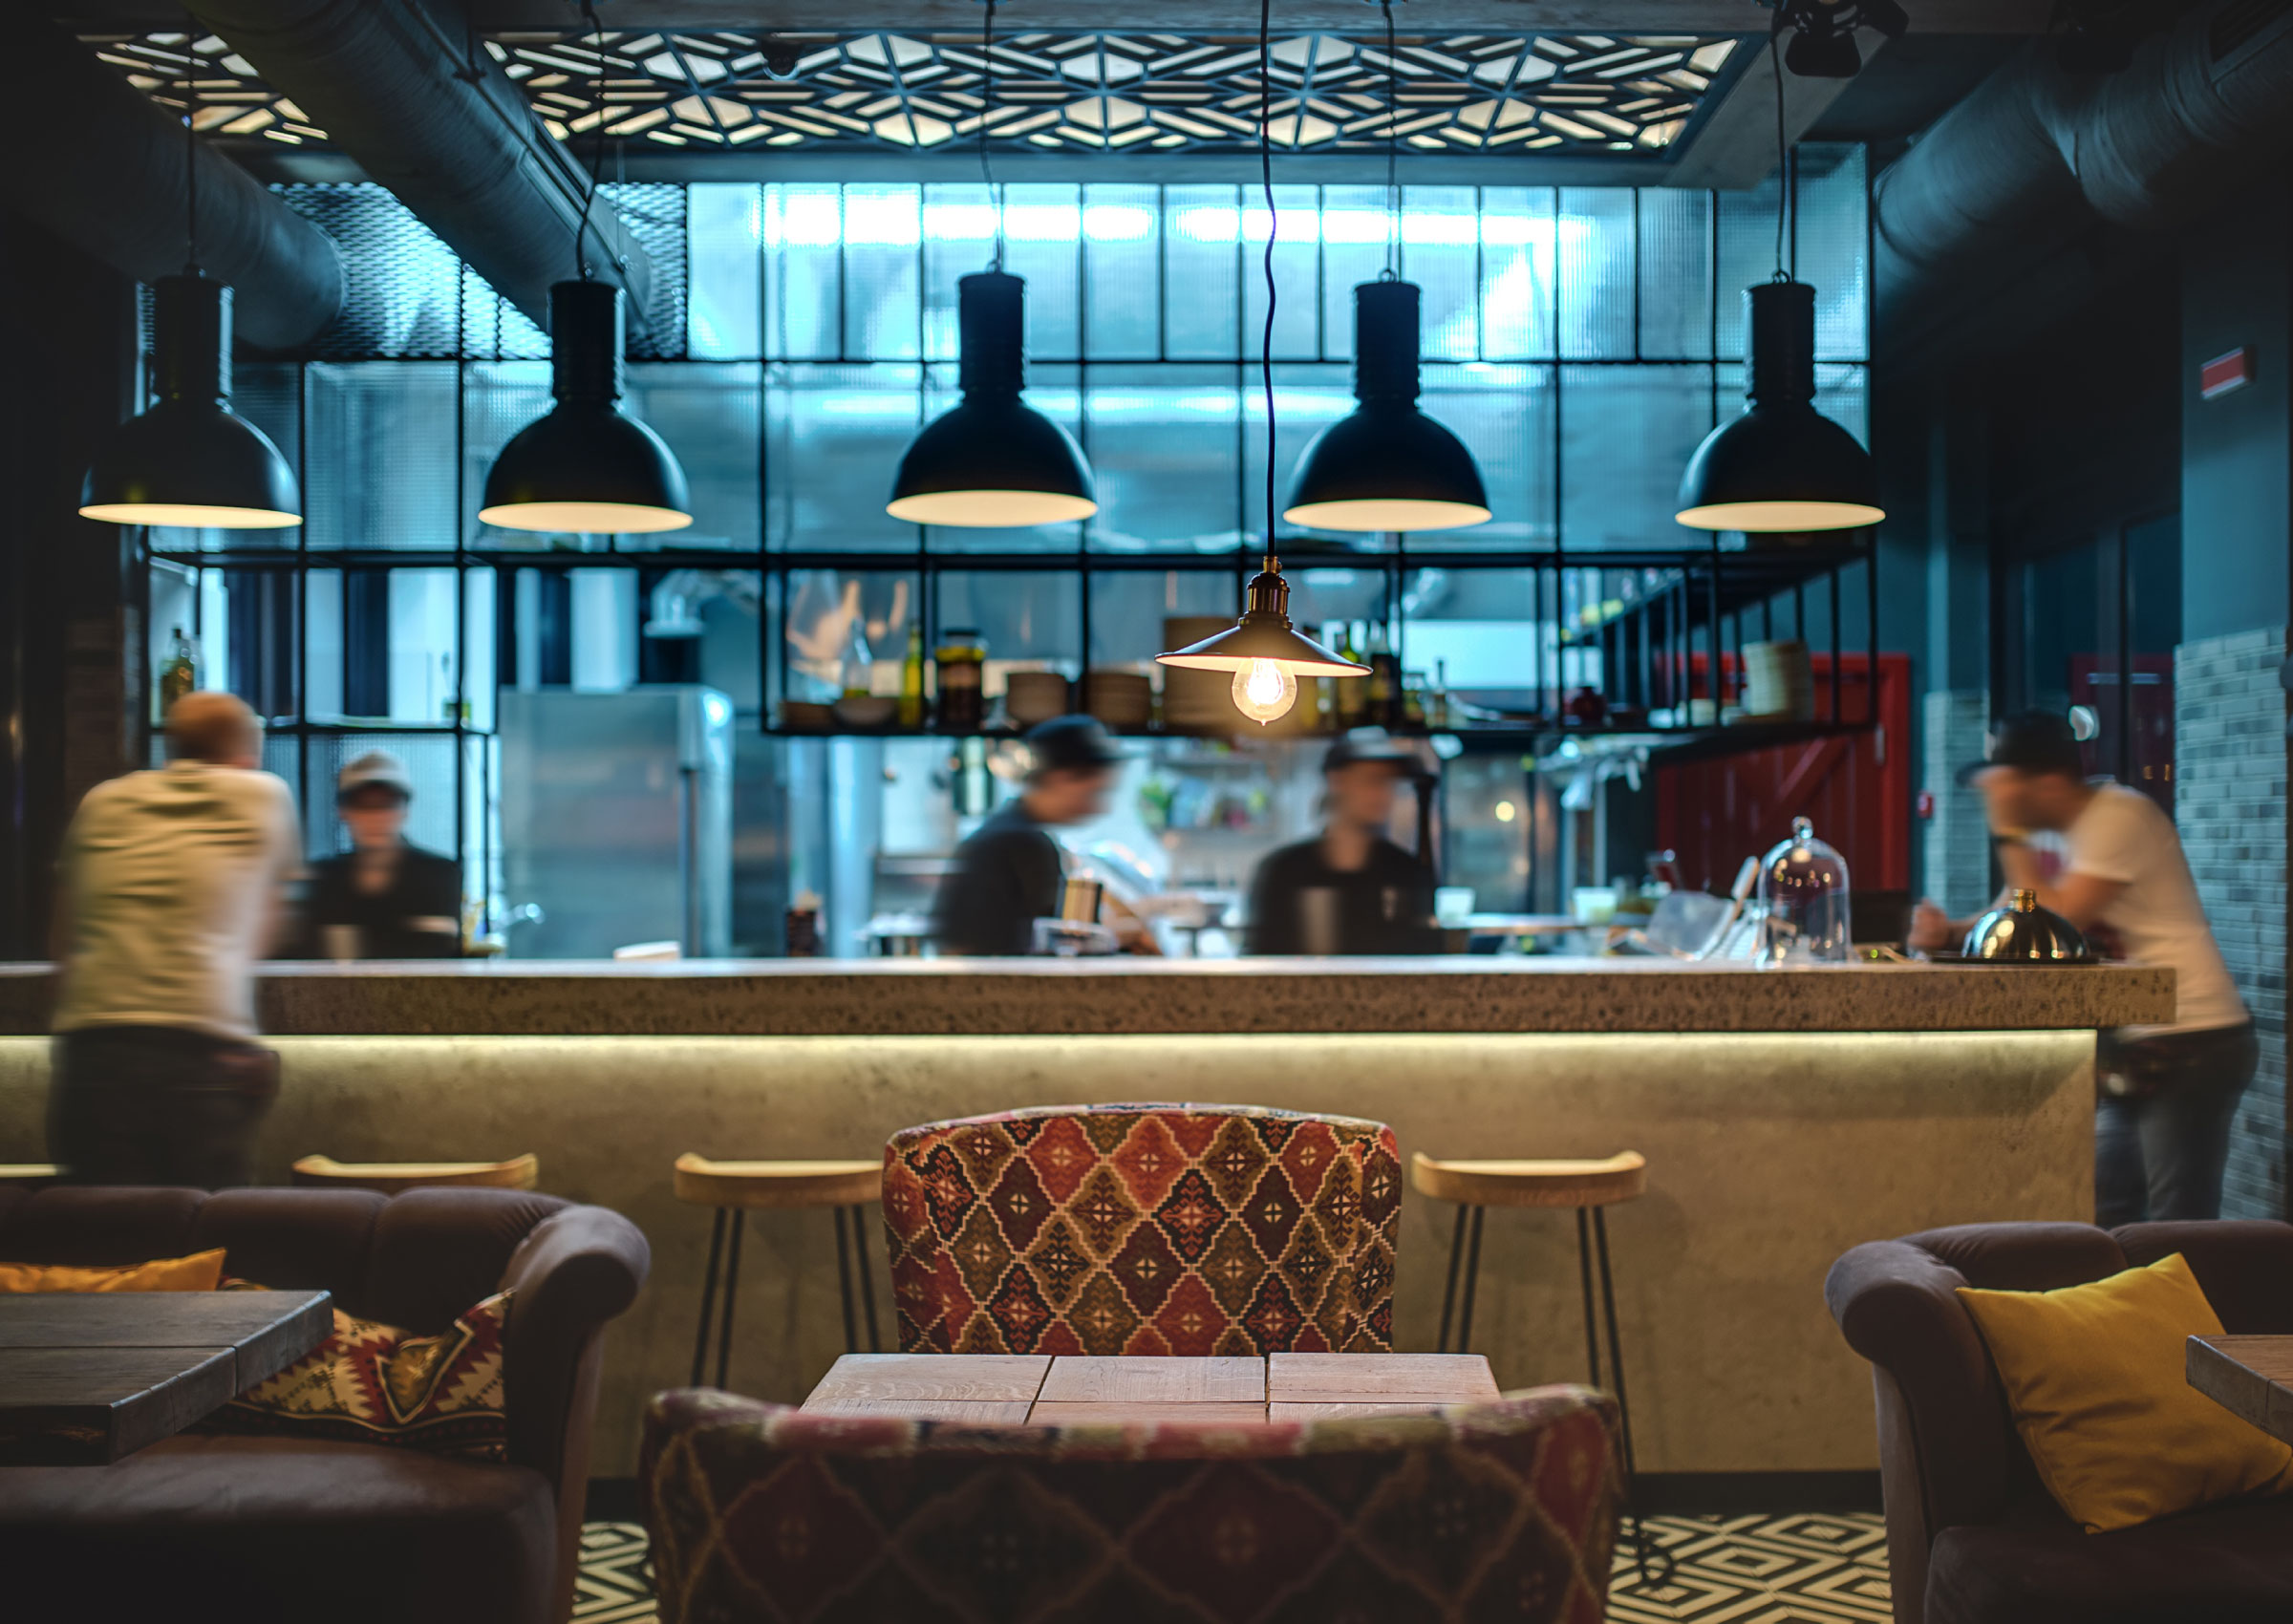 How Can Restaurants Double Revenues with the Internet of Things?